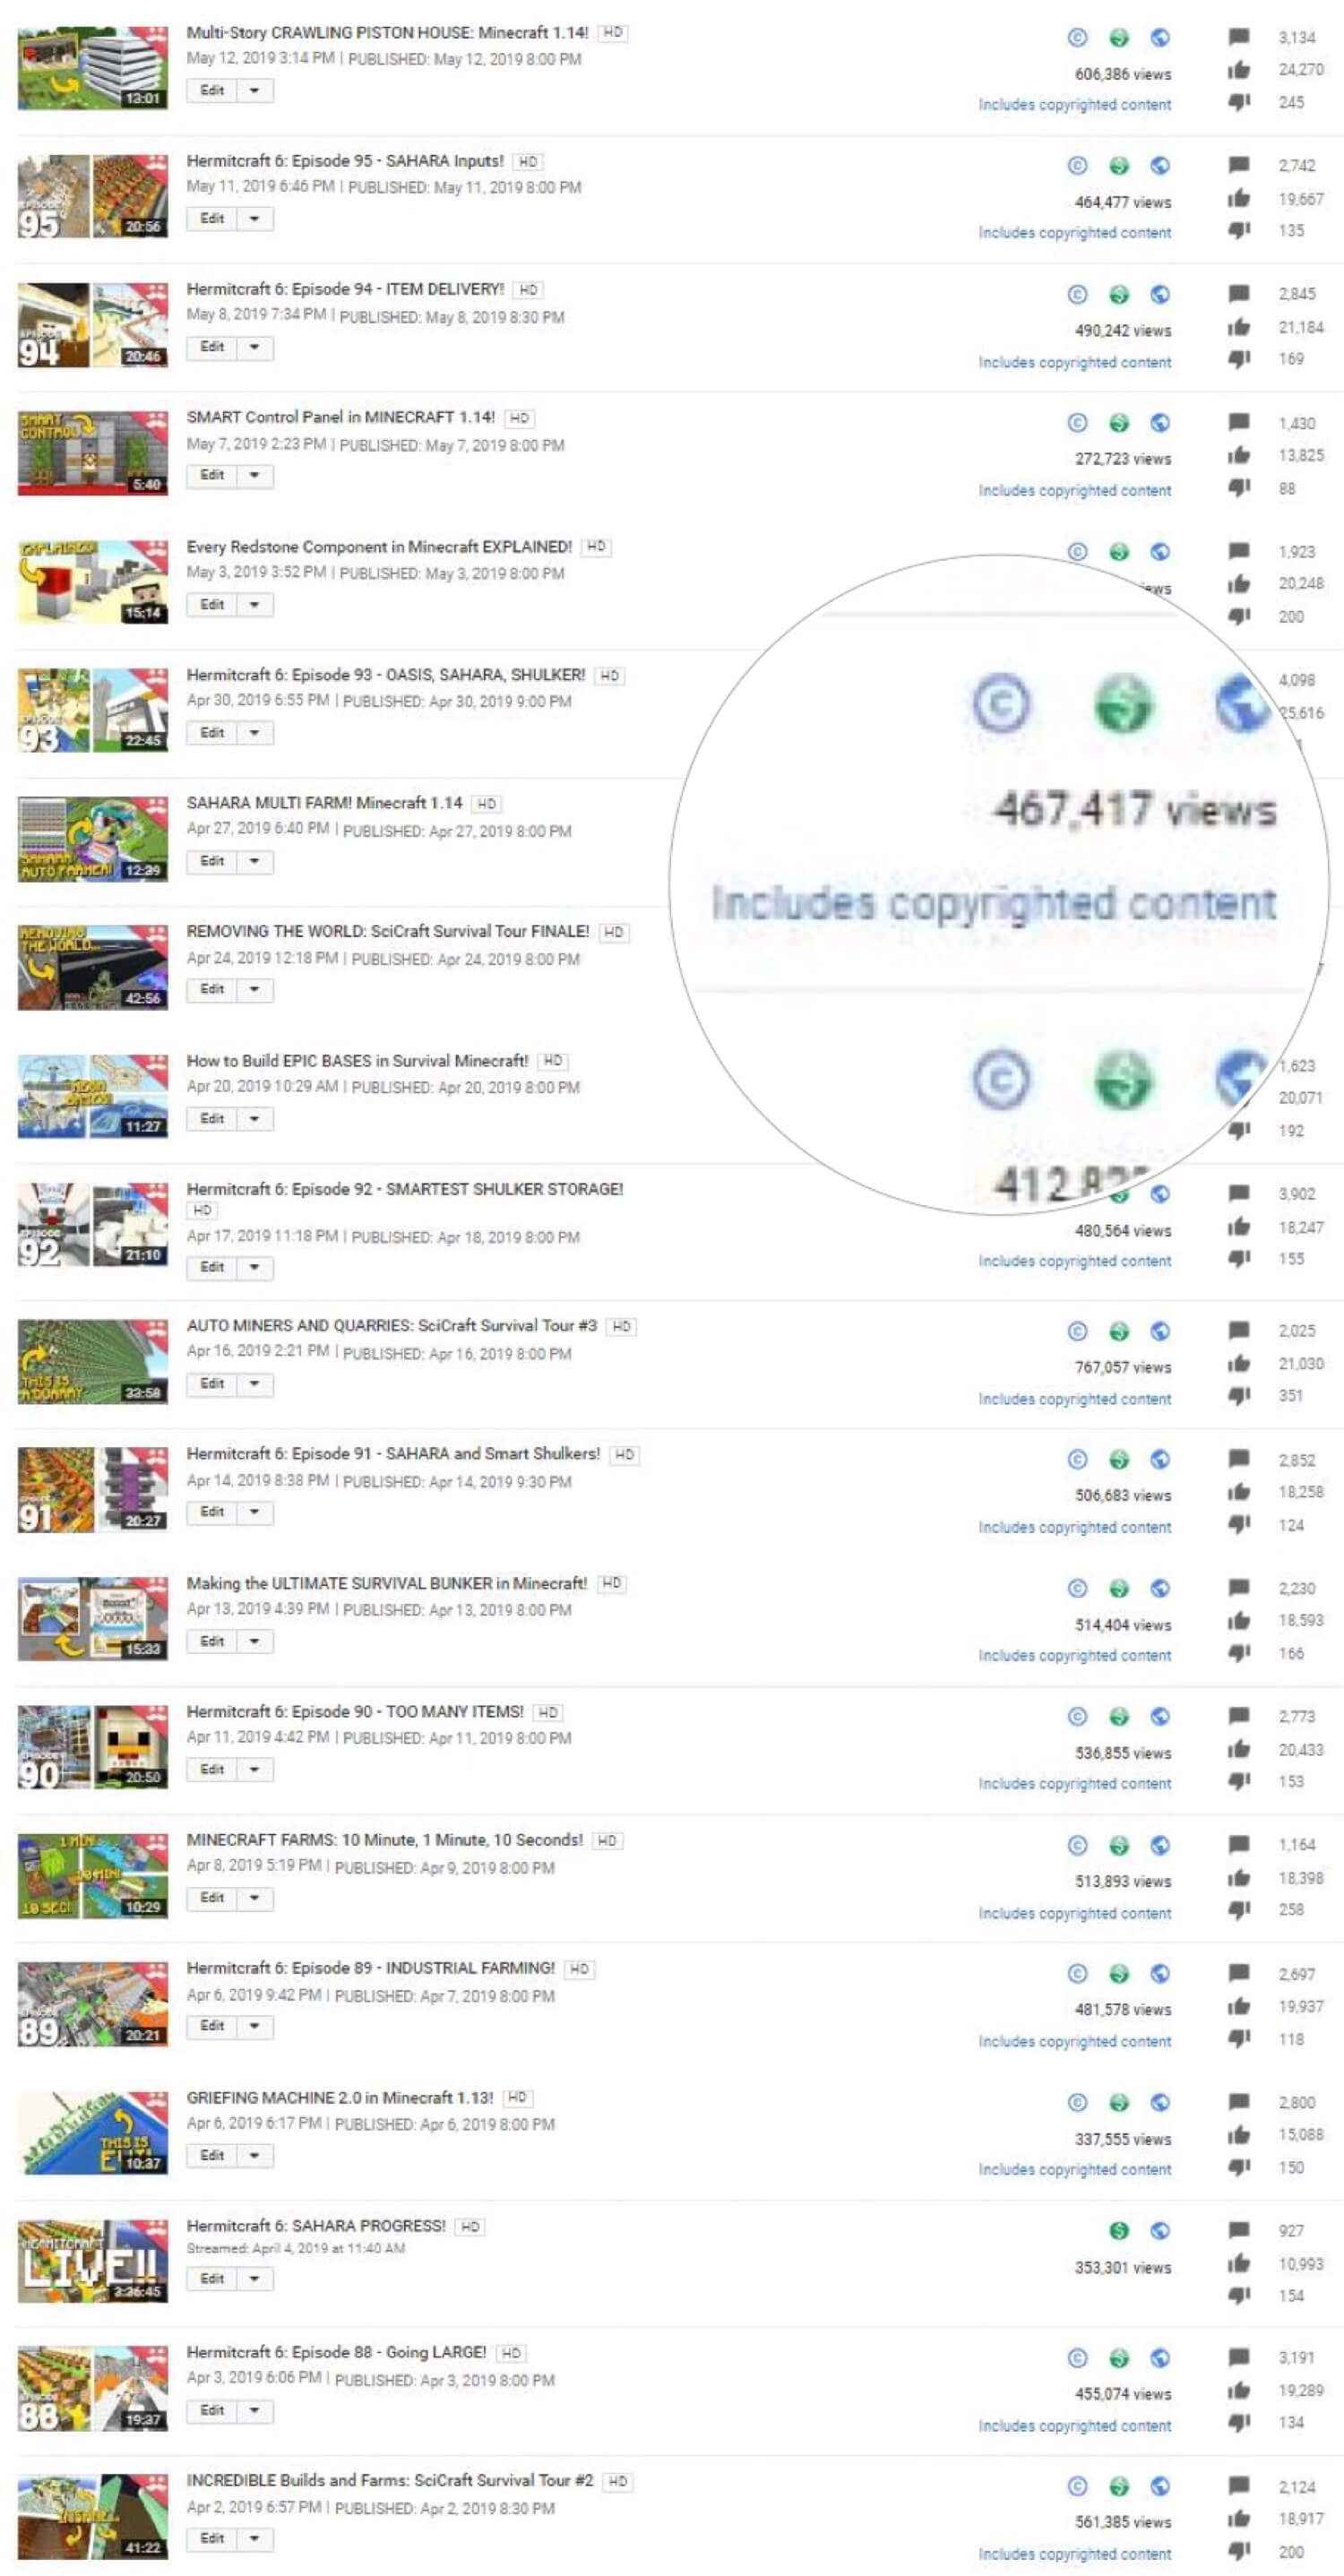 Some of the claimed videos in Mumbo Jumbo's YouTube copyright manager.